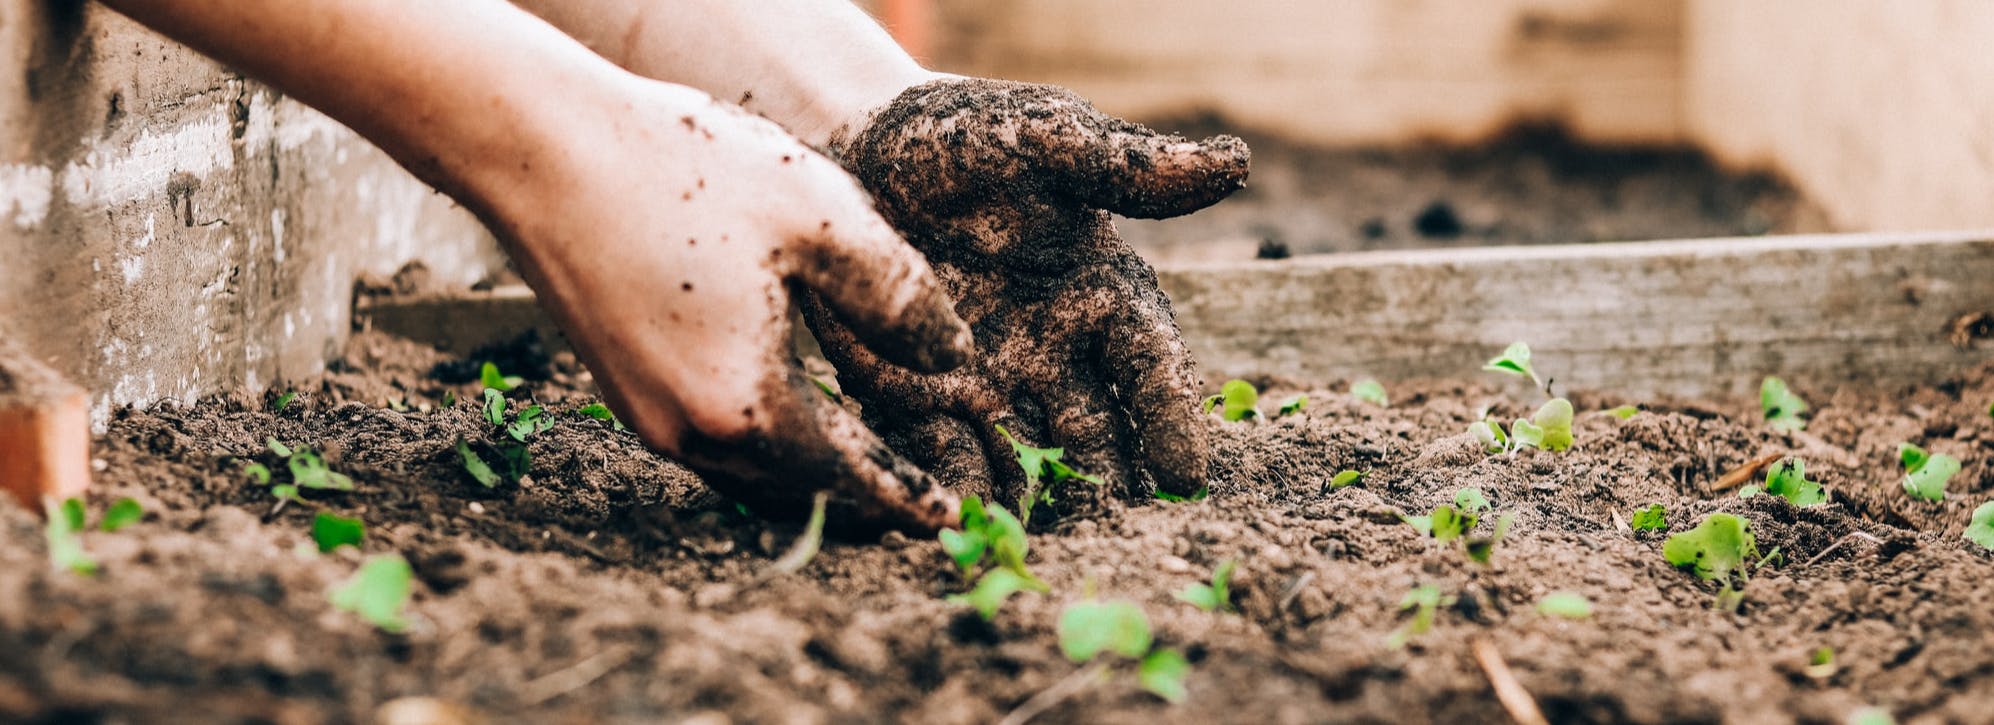 Two hands covered in soil cultivating seedlings in a tray